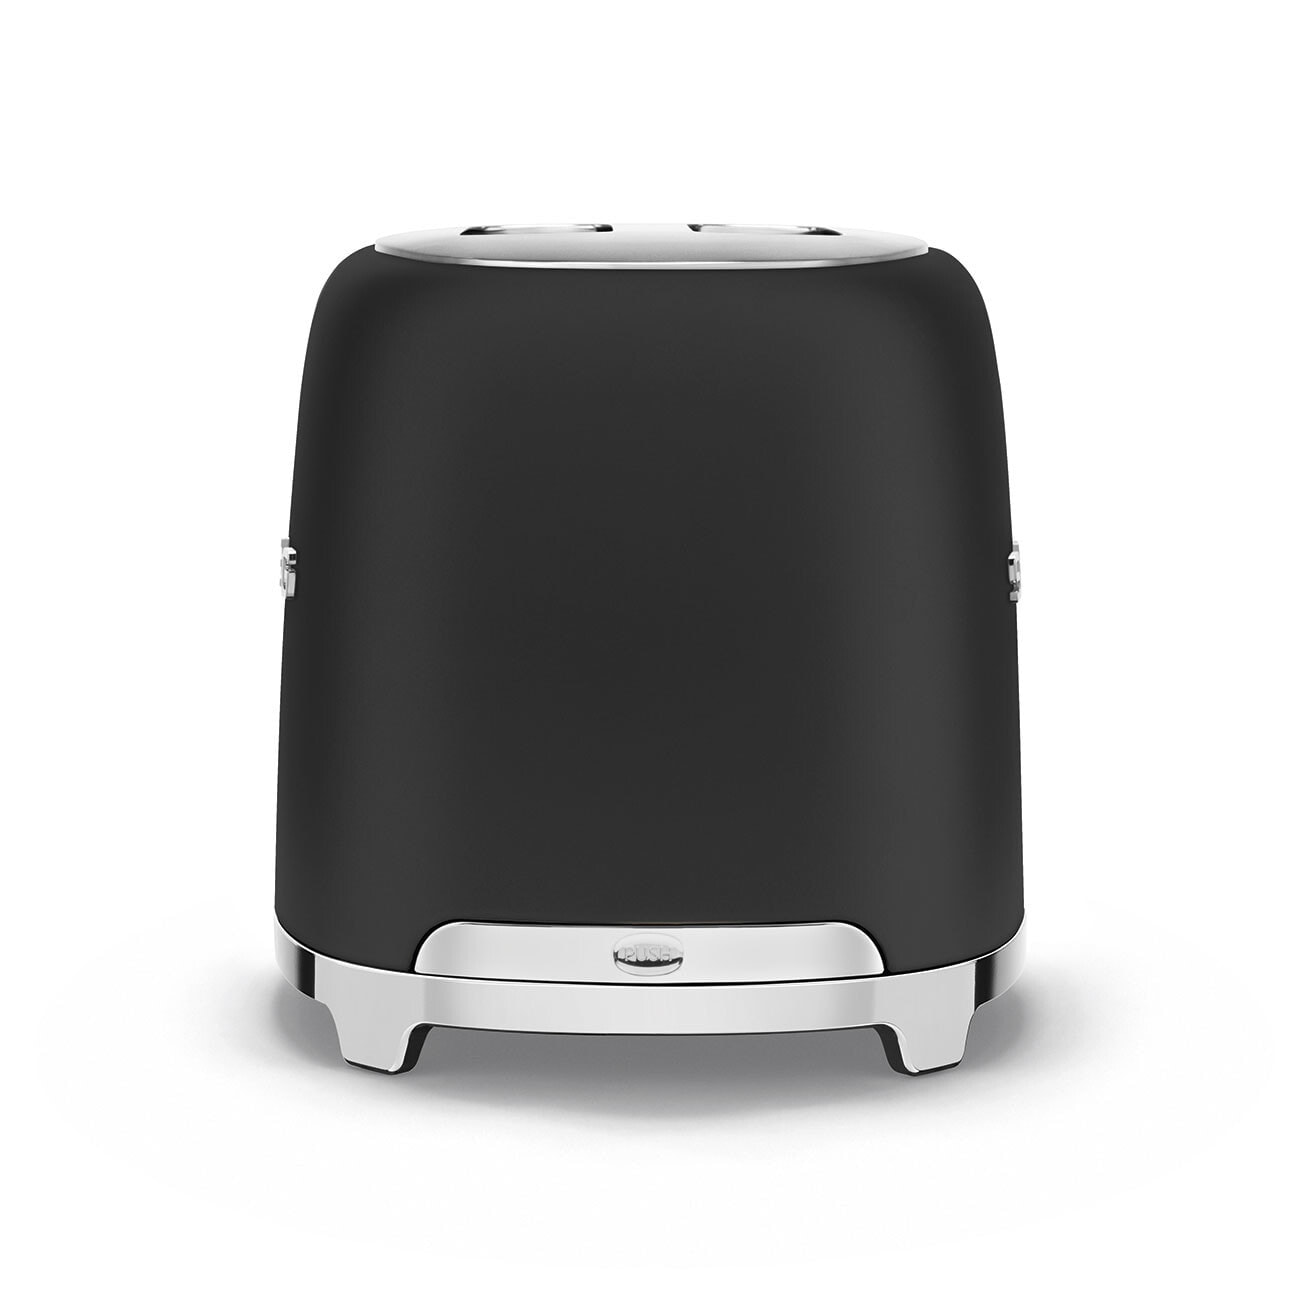 SMEG toaster TSF01BLMEU (Mat Blue) - 2 slice(s) - Black - Stainless steel - Plastic - Stainless steel - Buttons - Level - China - 950 W